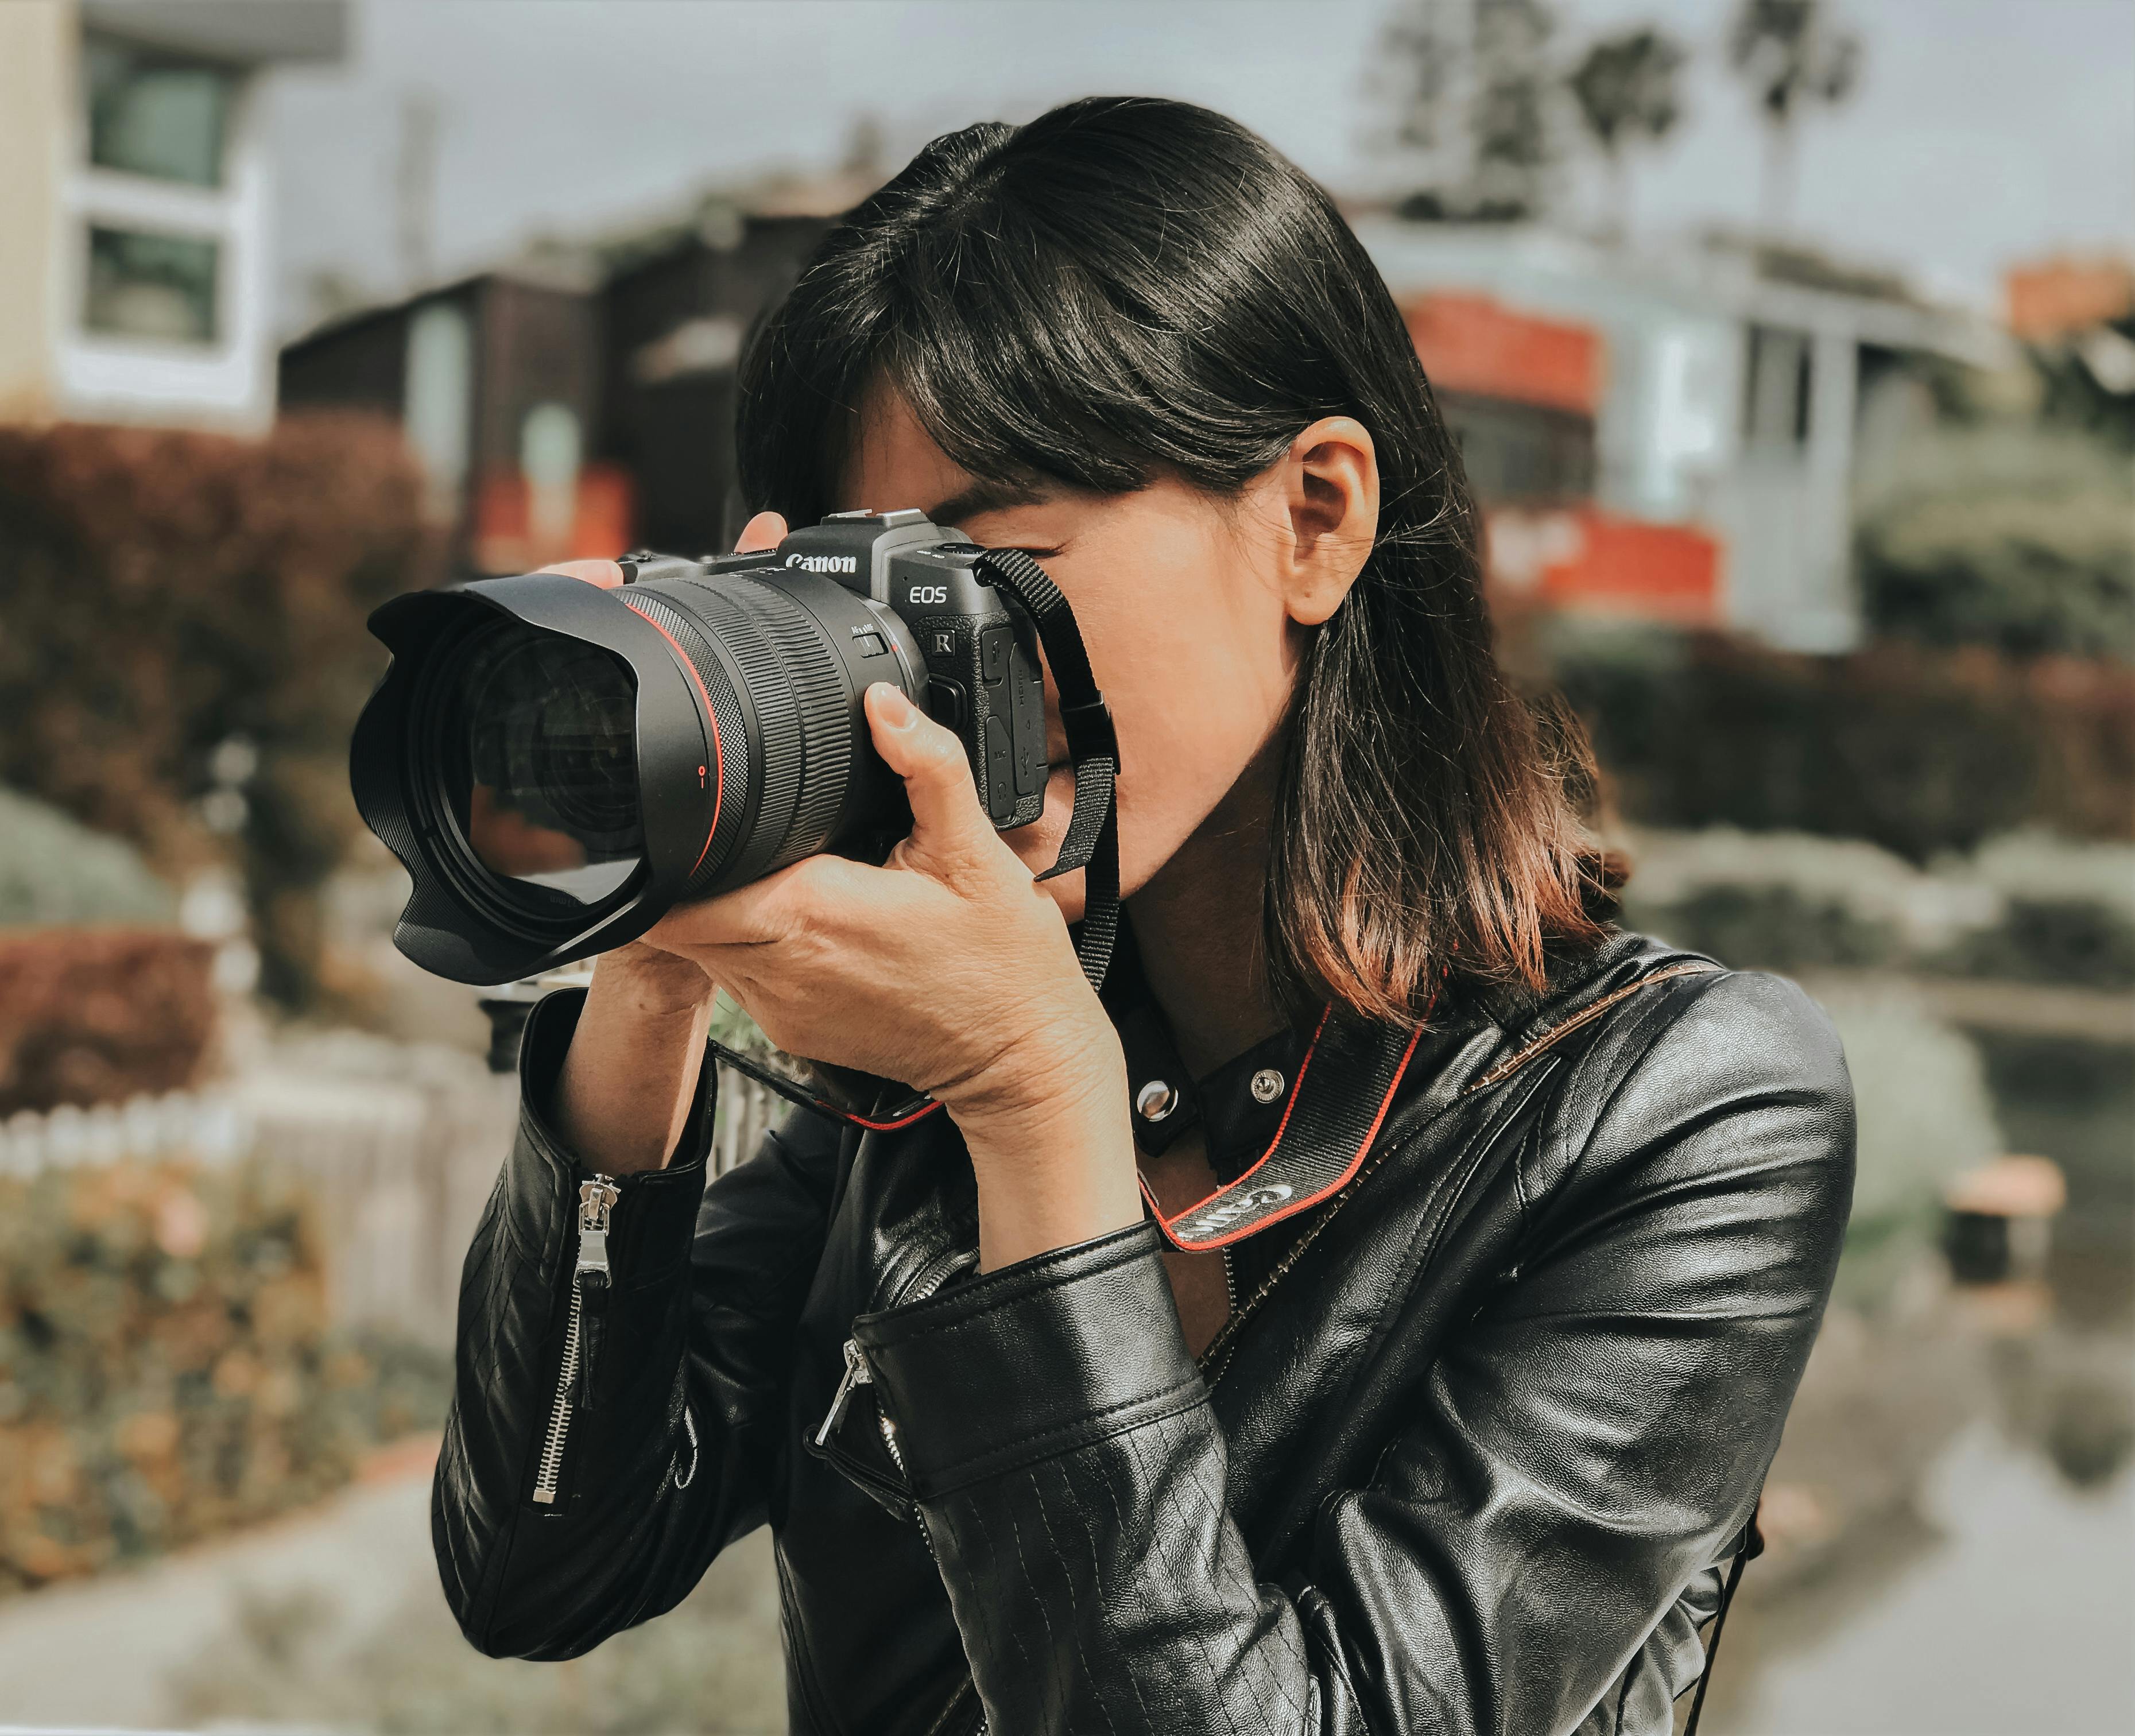 A woman photographs with a professional camera.